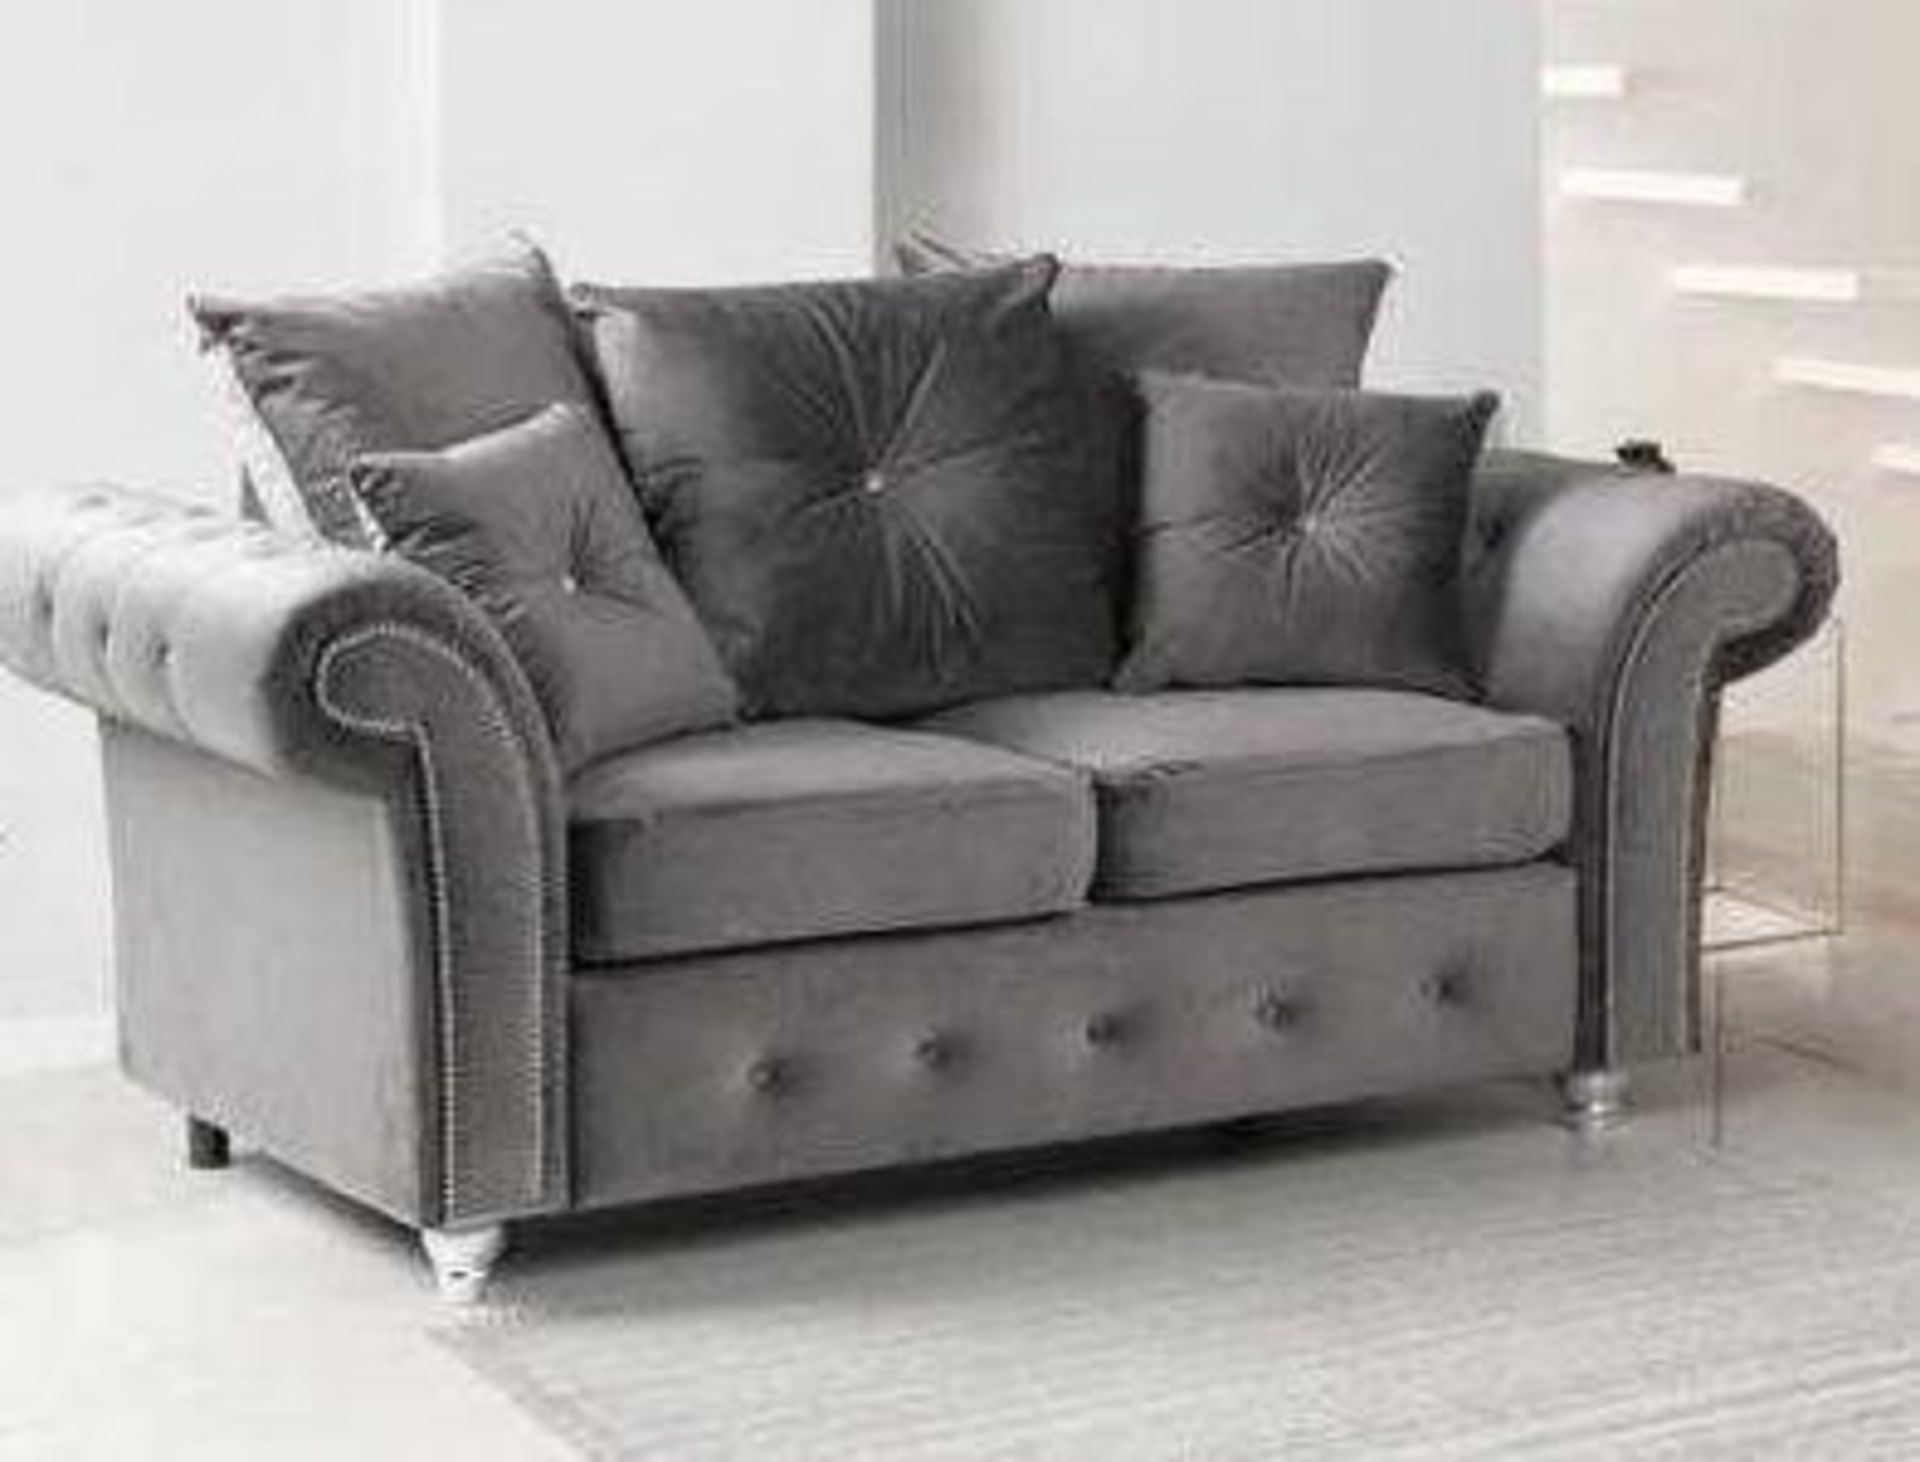 BRAND NEW Bedford 2 seater sofa. RRP: £749